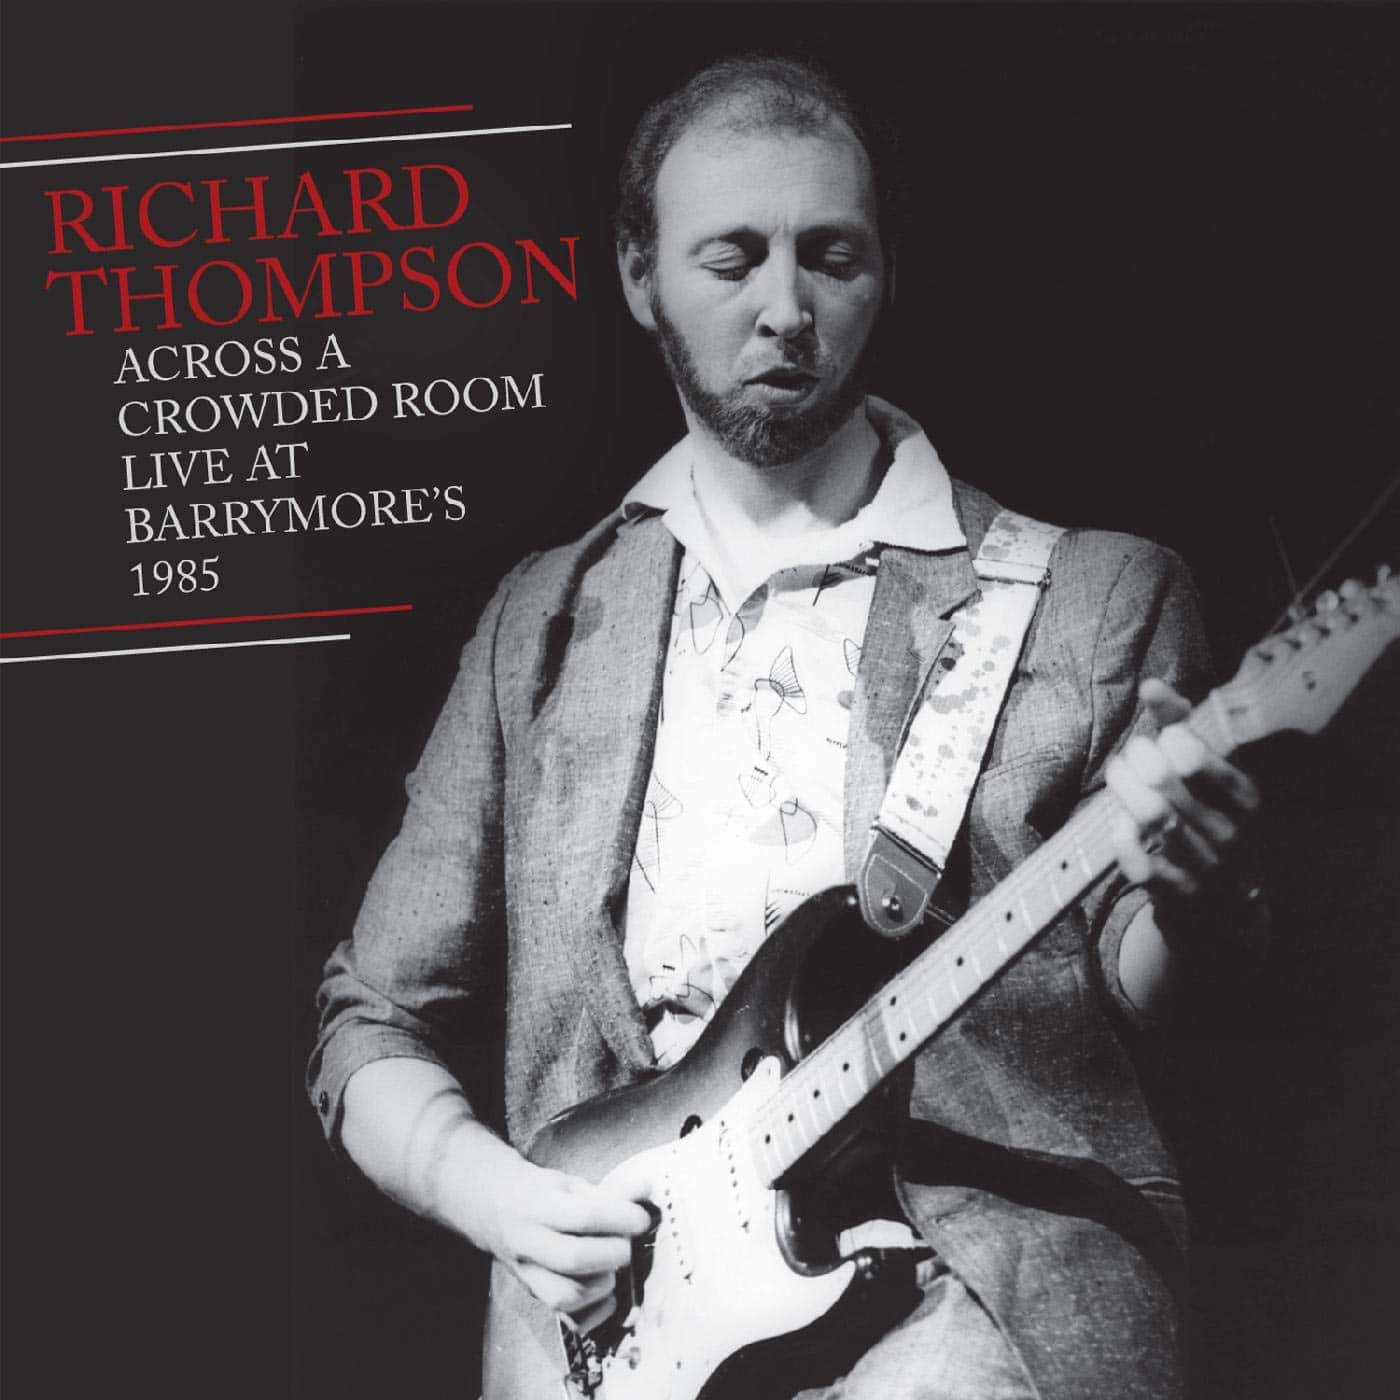 Richard Thompson: Across a Crowded Room — Live at Barrymore’s 1985